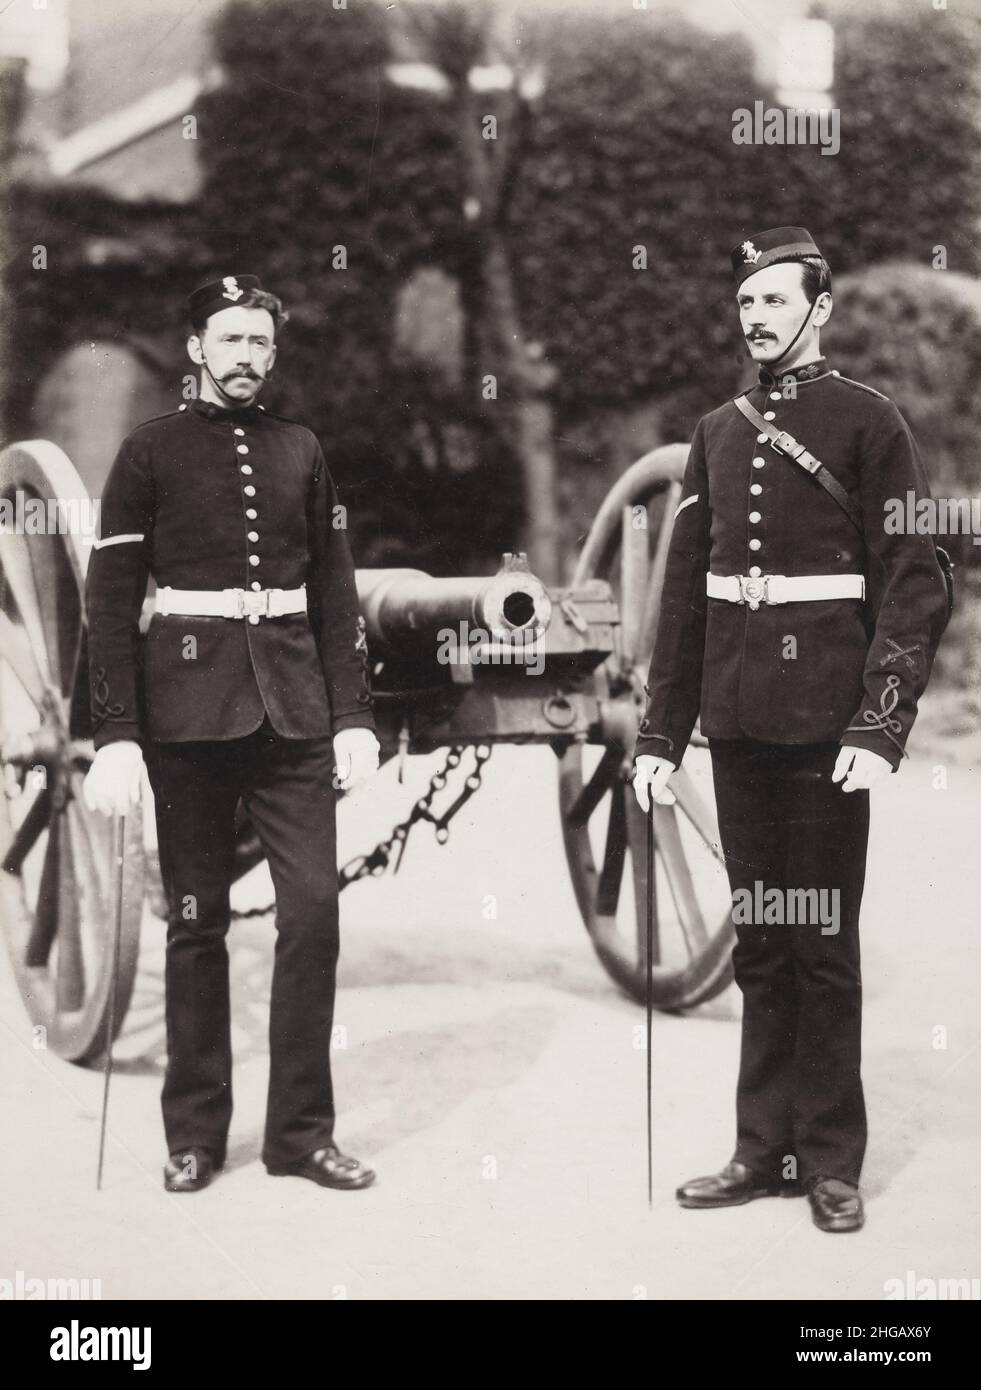 Vintage late 19th century photograph: 1890's British Army Regiment: Postmen, Royal Military Academy. Stock Photo